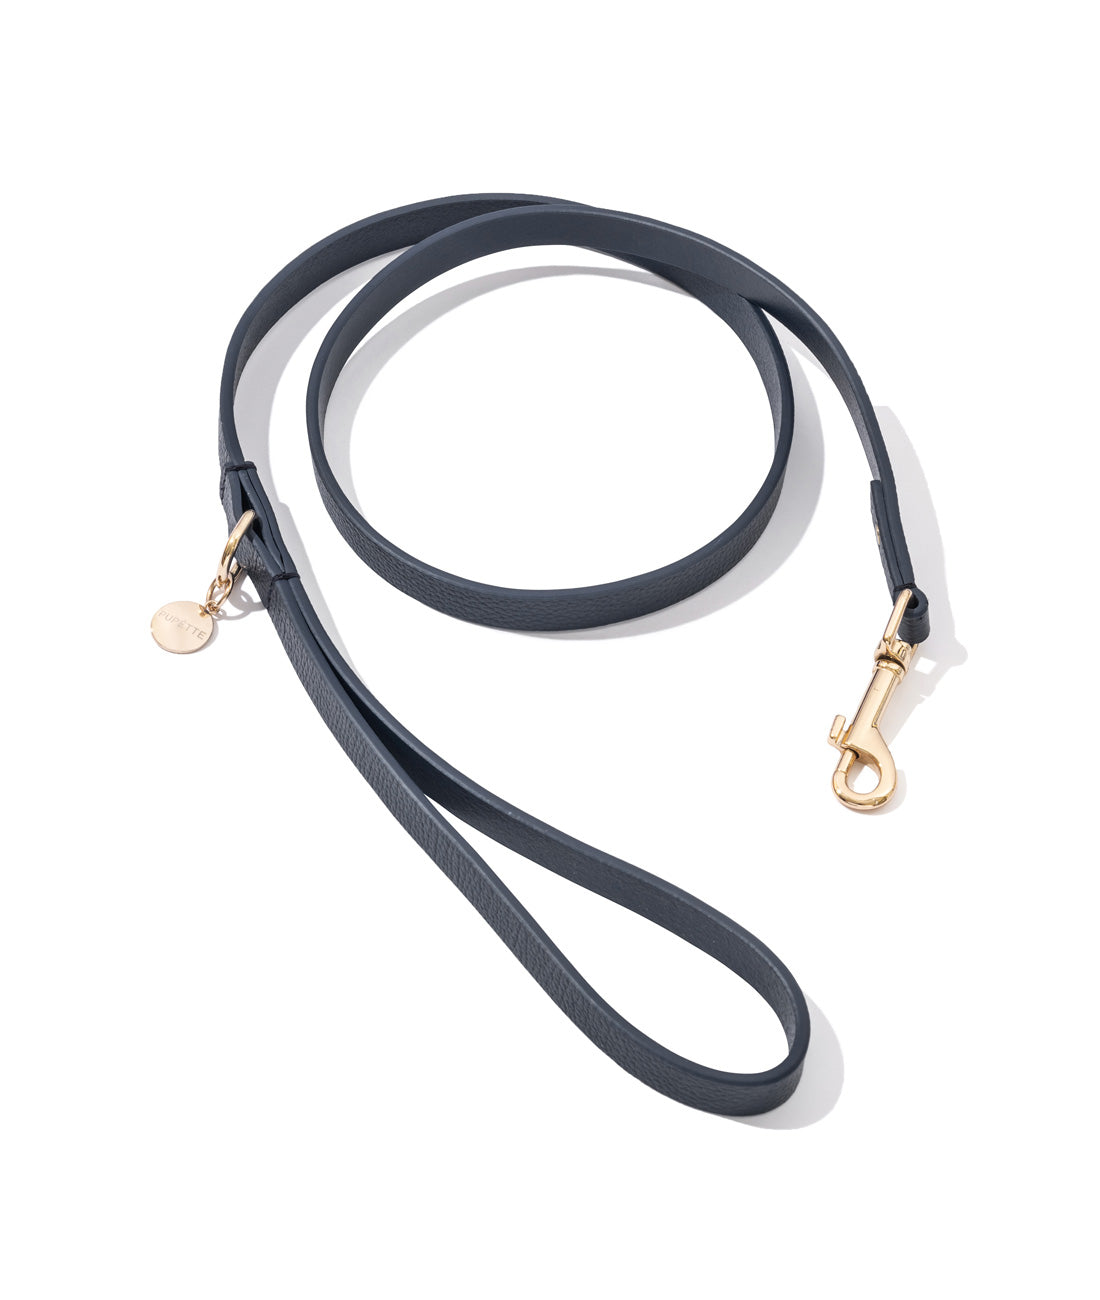 Luxe Leather Dog Lead - Black